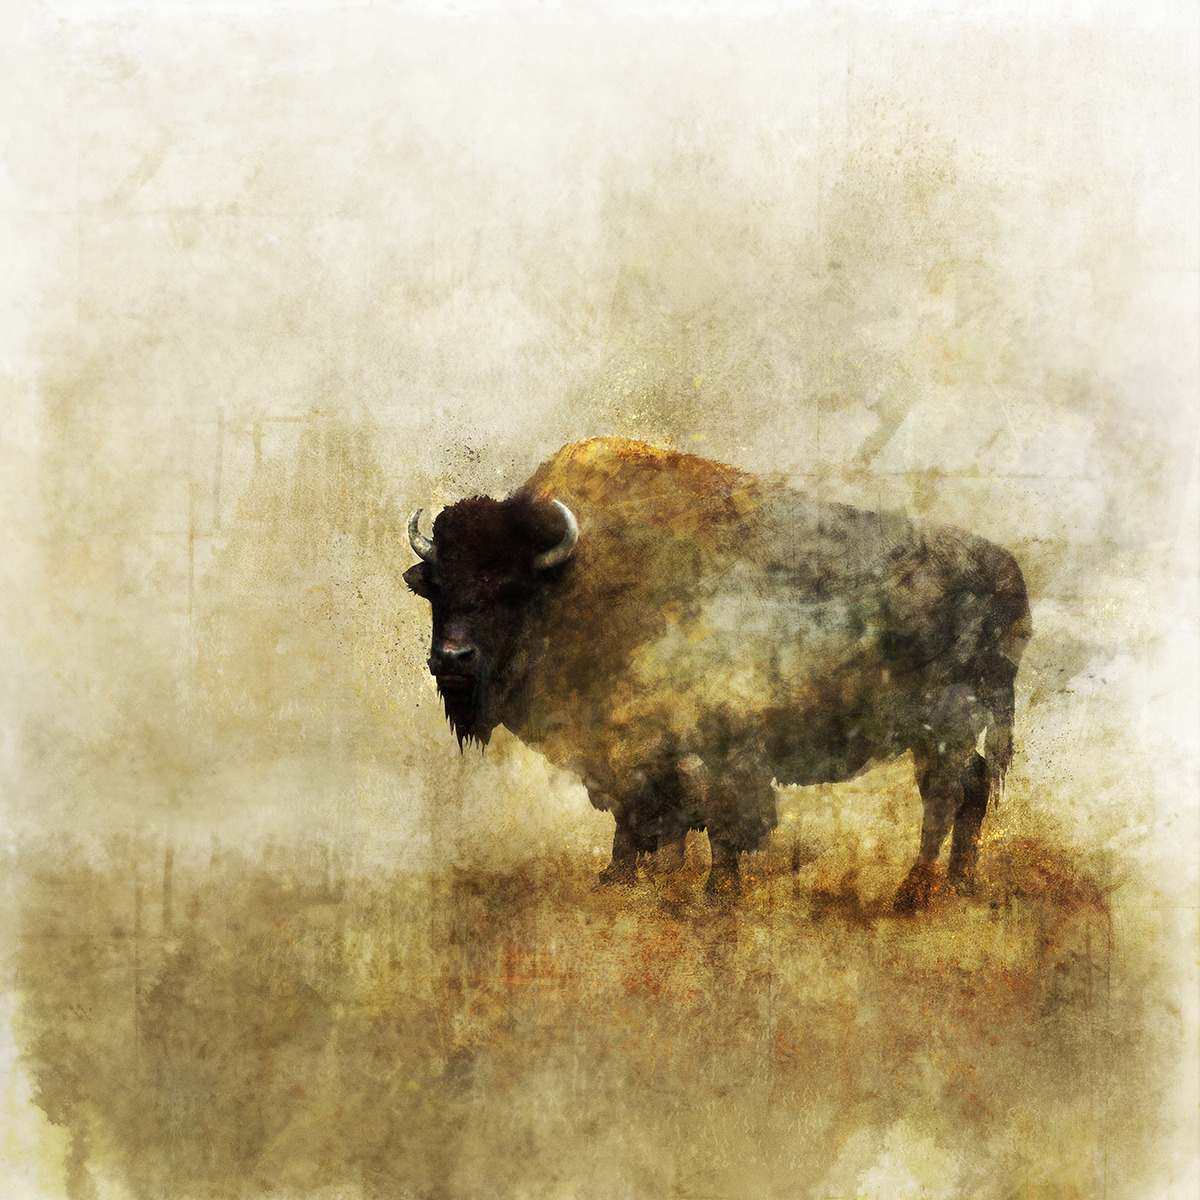 Ken RokoPeaceful Bison 02: Giclee Fine Art Print 13x19Please Check out more images from Etsy.com:https://www.etsy.com/ca/listing/123035048/peaceful-bison-02-giclee-fine-art-print?ref=shop_home_active_1 